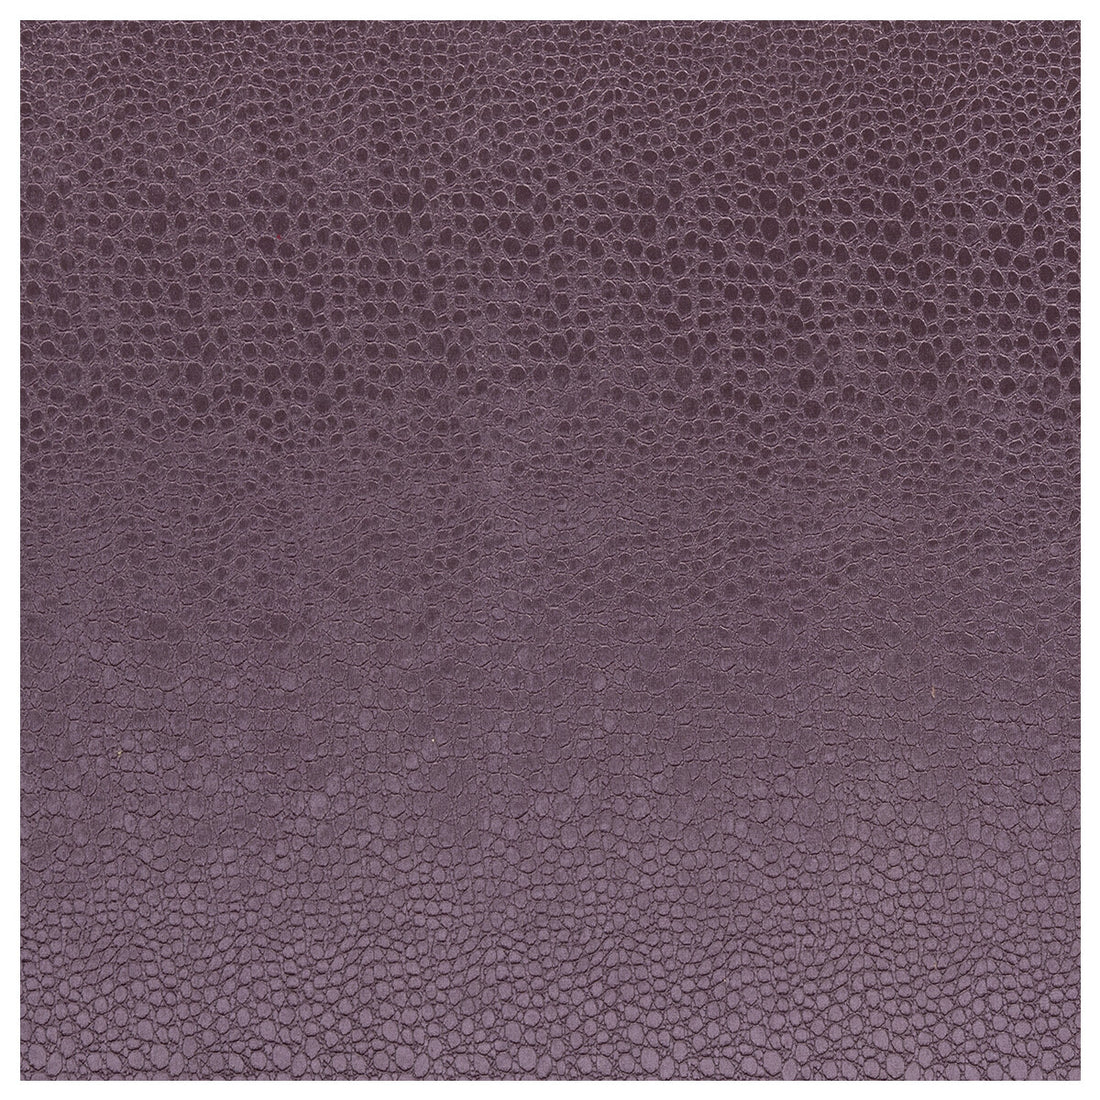 Pulse fabric in grape color - pattern F0469/08.CAC.0 - by Clarke And Clarke in the Clarke &amp; Clarke Tempo Velvets collection